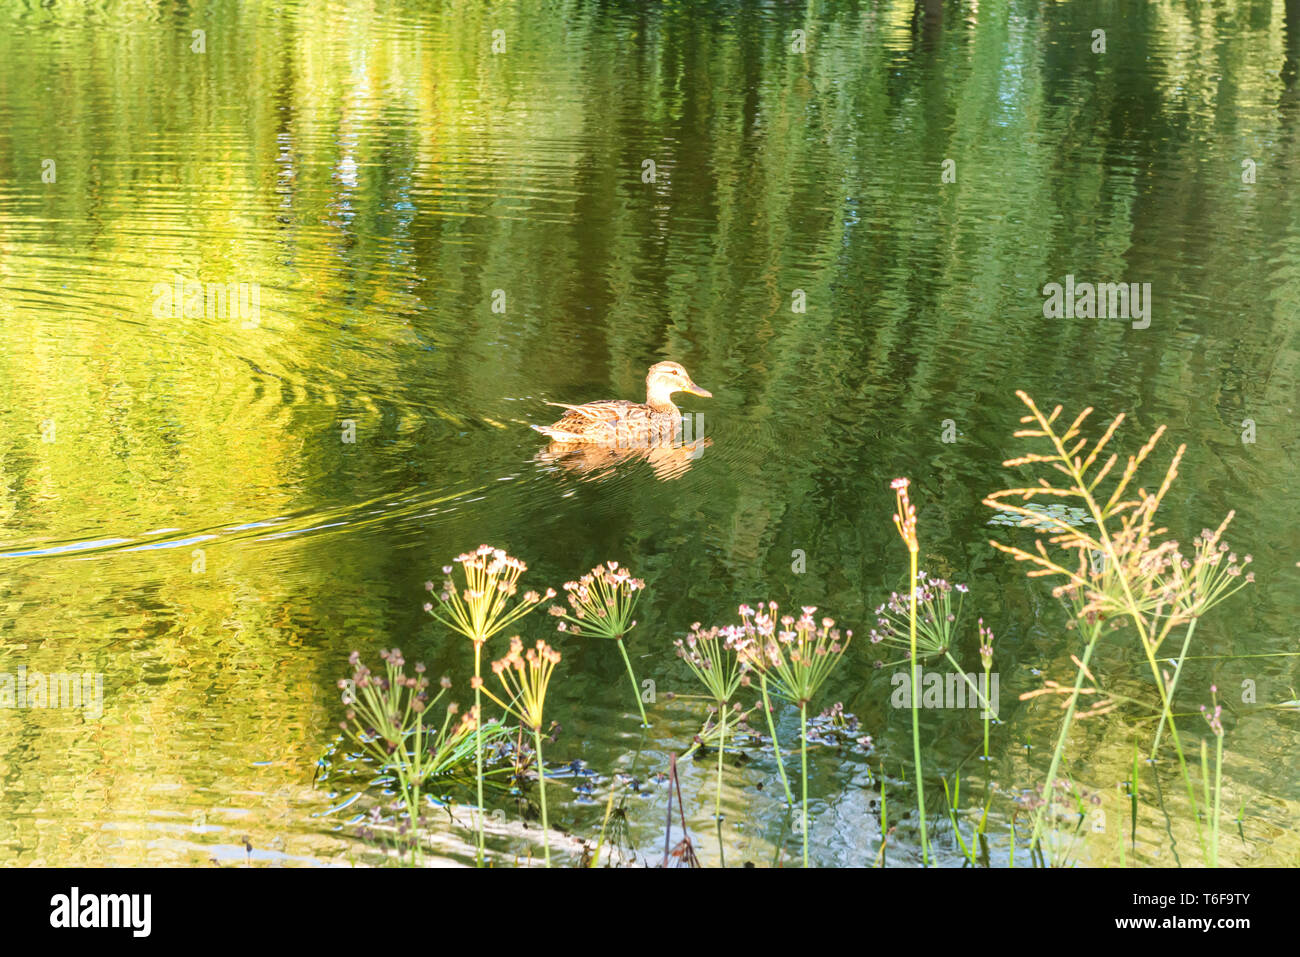 Duck at water with green reflection Stock Photo